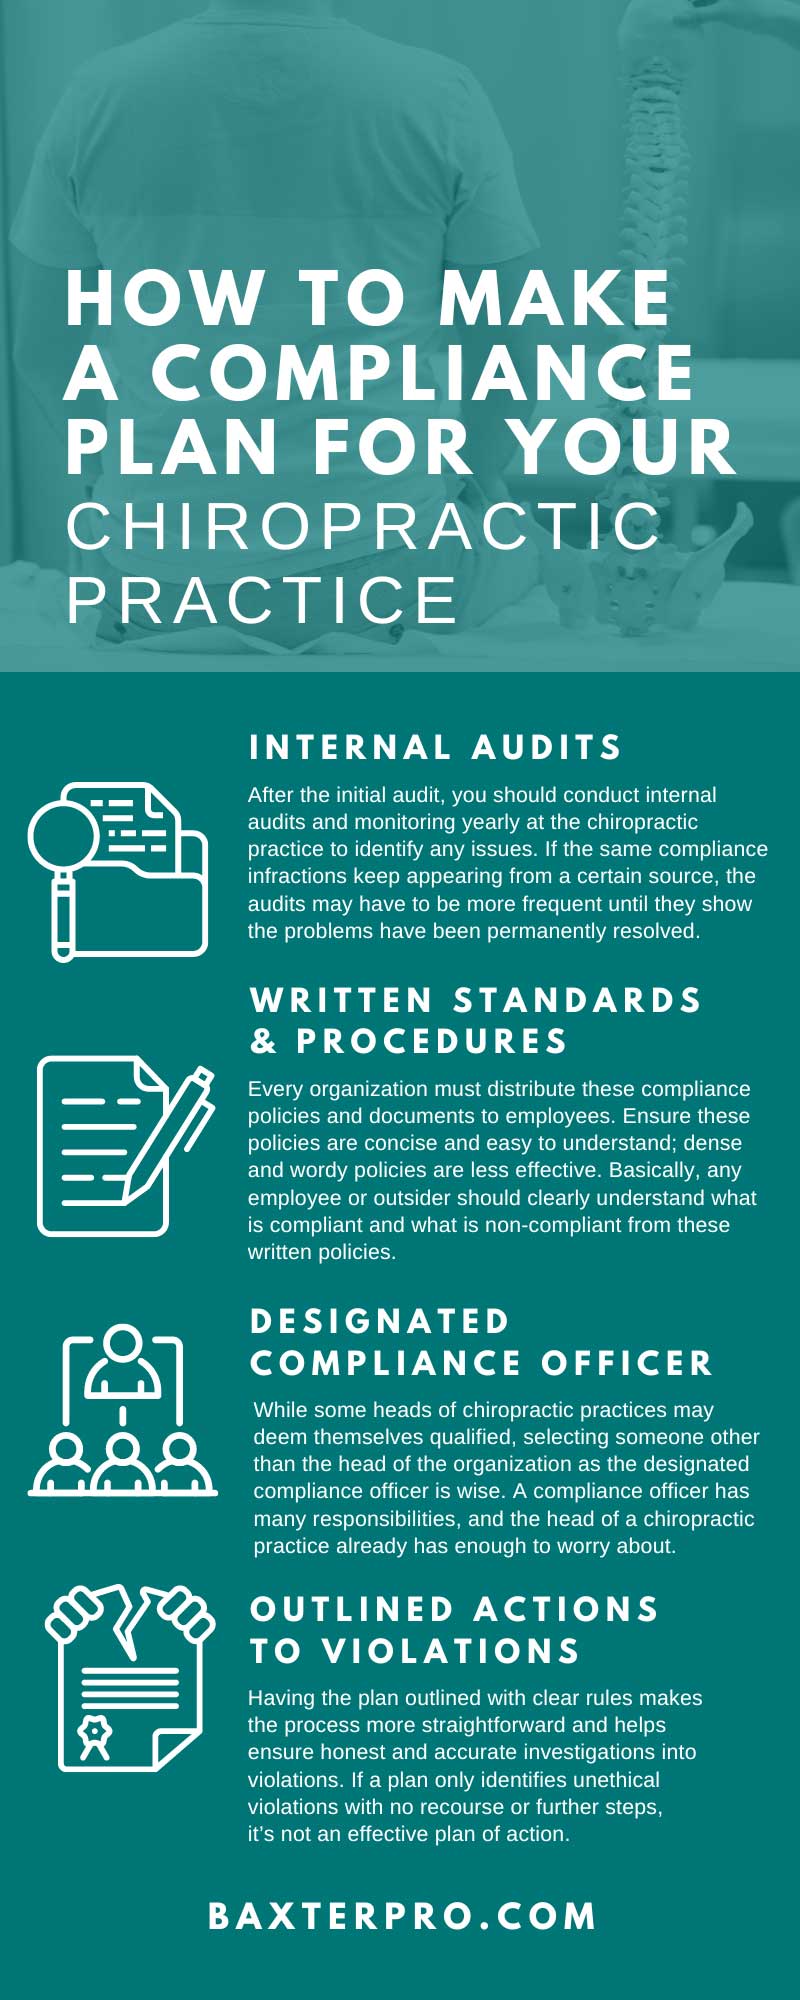 How To Make a Compliance Plan for Your Chiropractic Practice